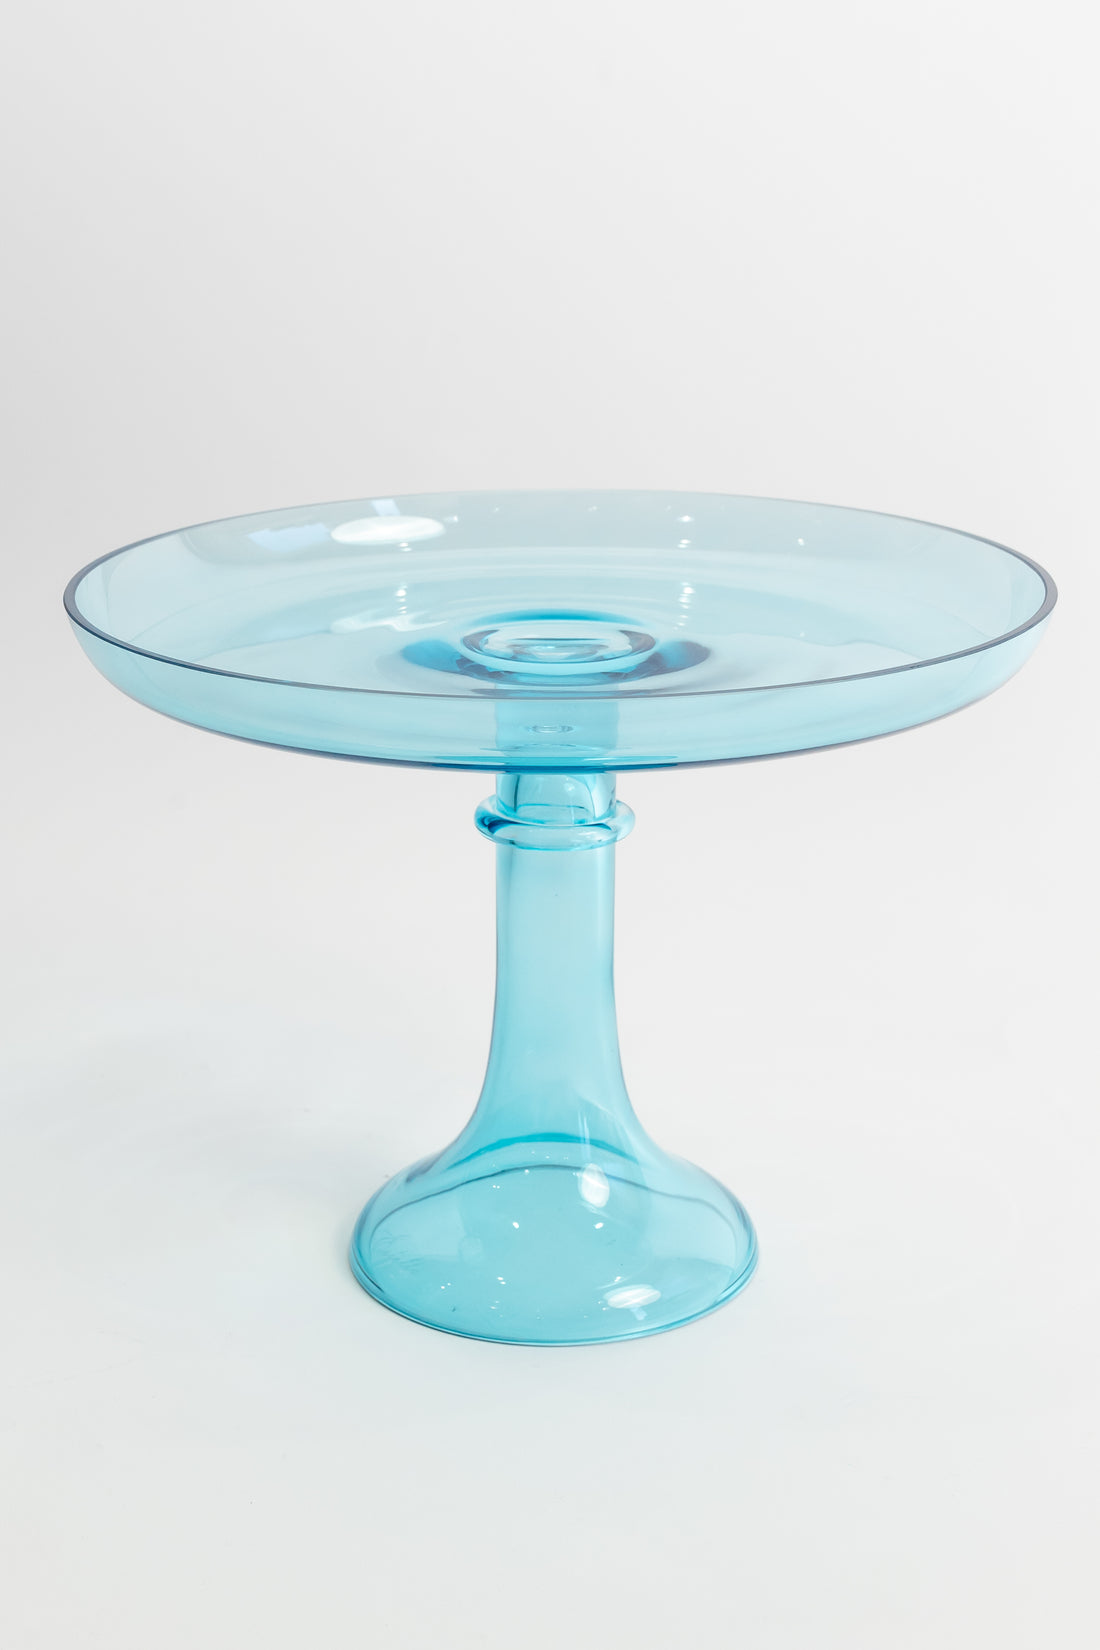 Estelle Colored Glass Hand-Blown Pastel Cake Stand, Made in Poland on Food52